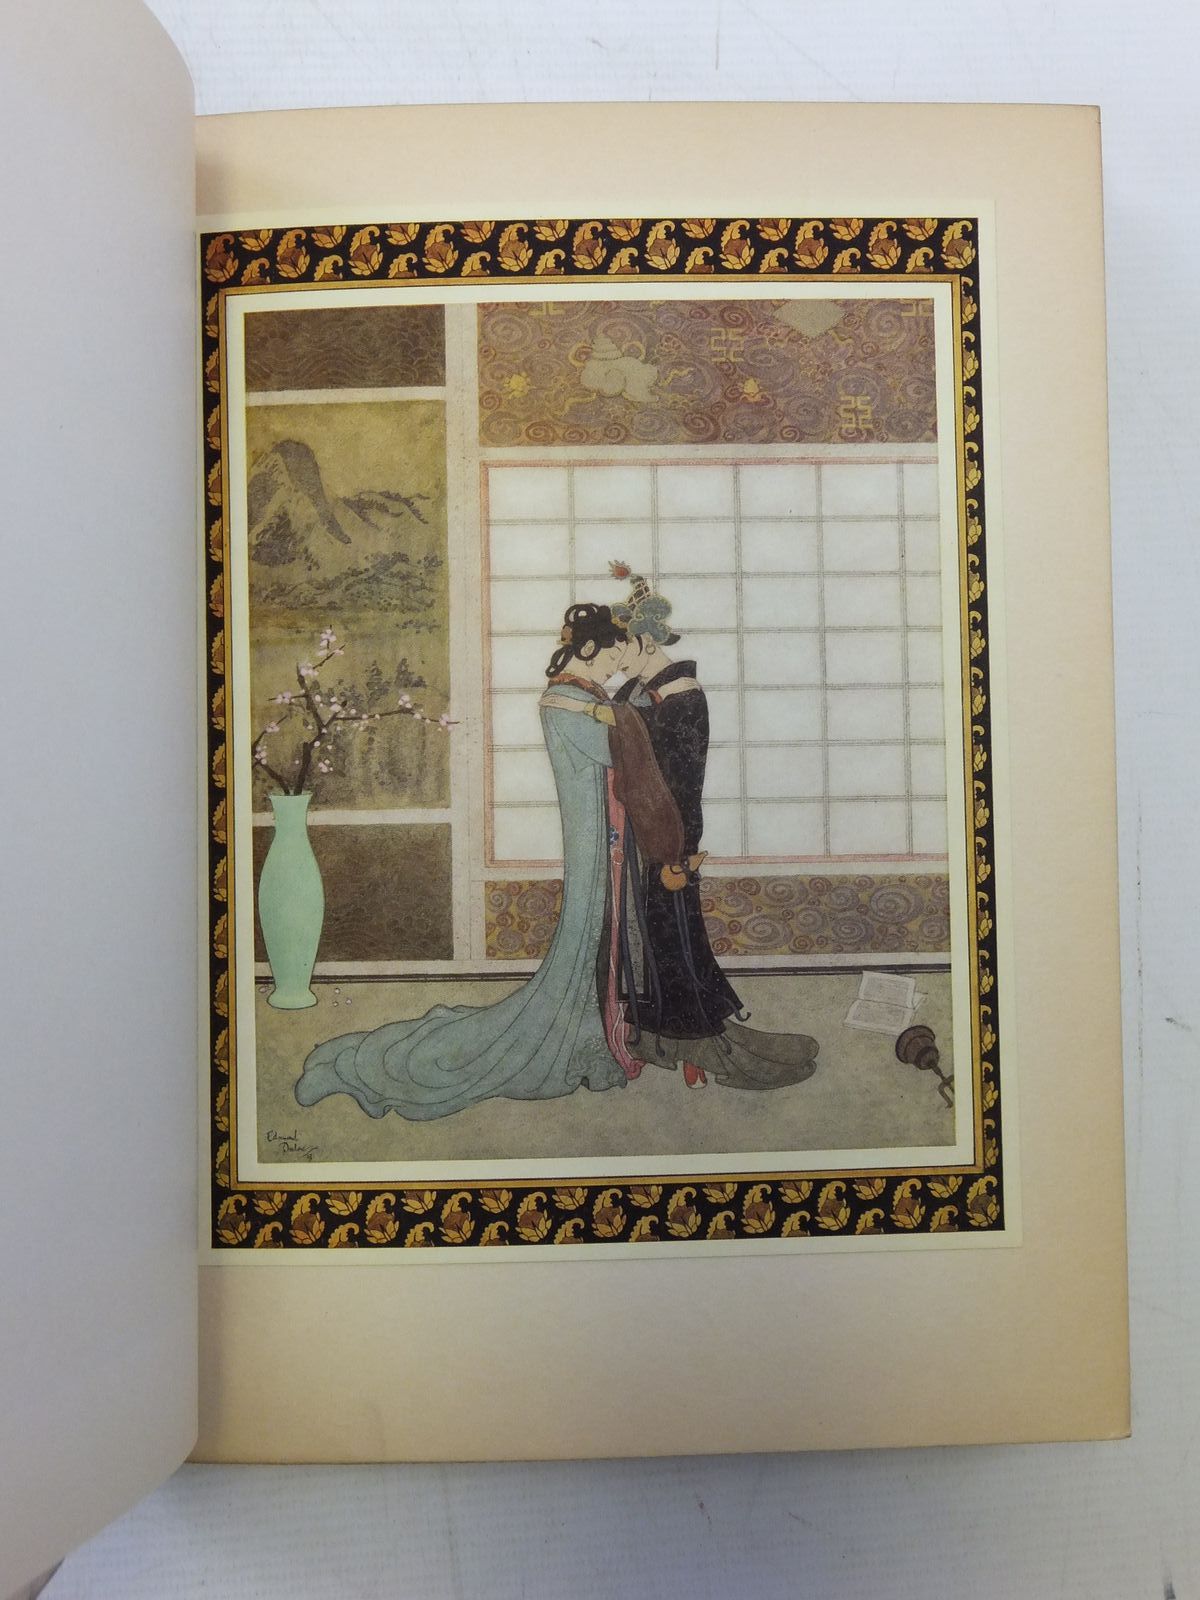 Photo of PRINCESS BADOURA written by Housman, Laurence illustrated by Dulac, Edmund published by Hodder & Stoughton (STOCK CODE: 2119790)  for sale by Stella & Rose's Books